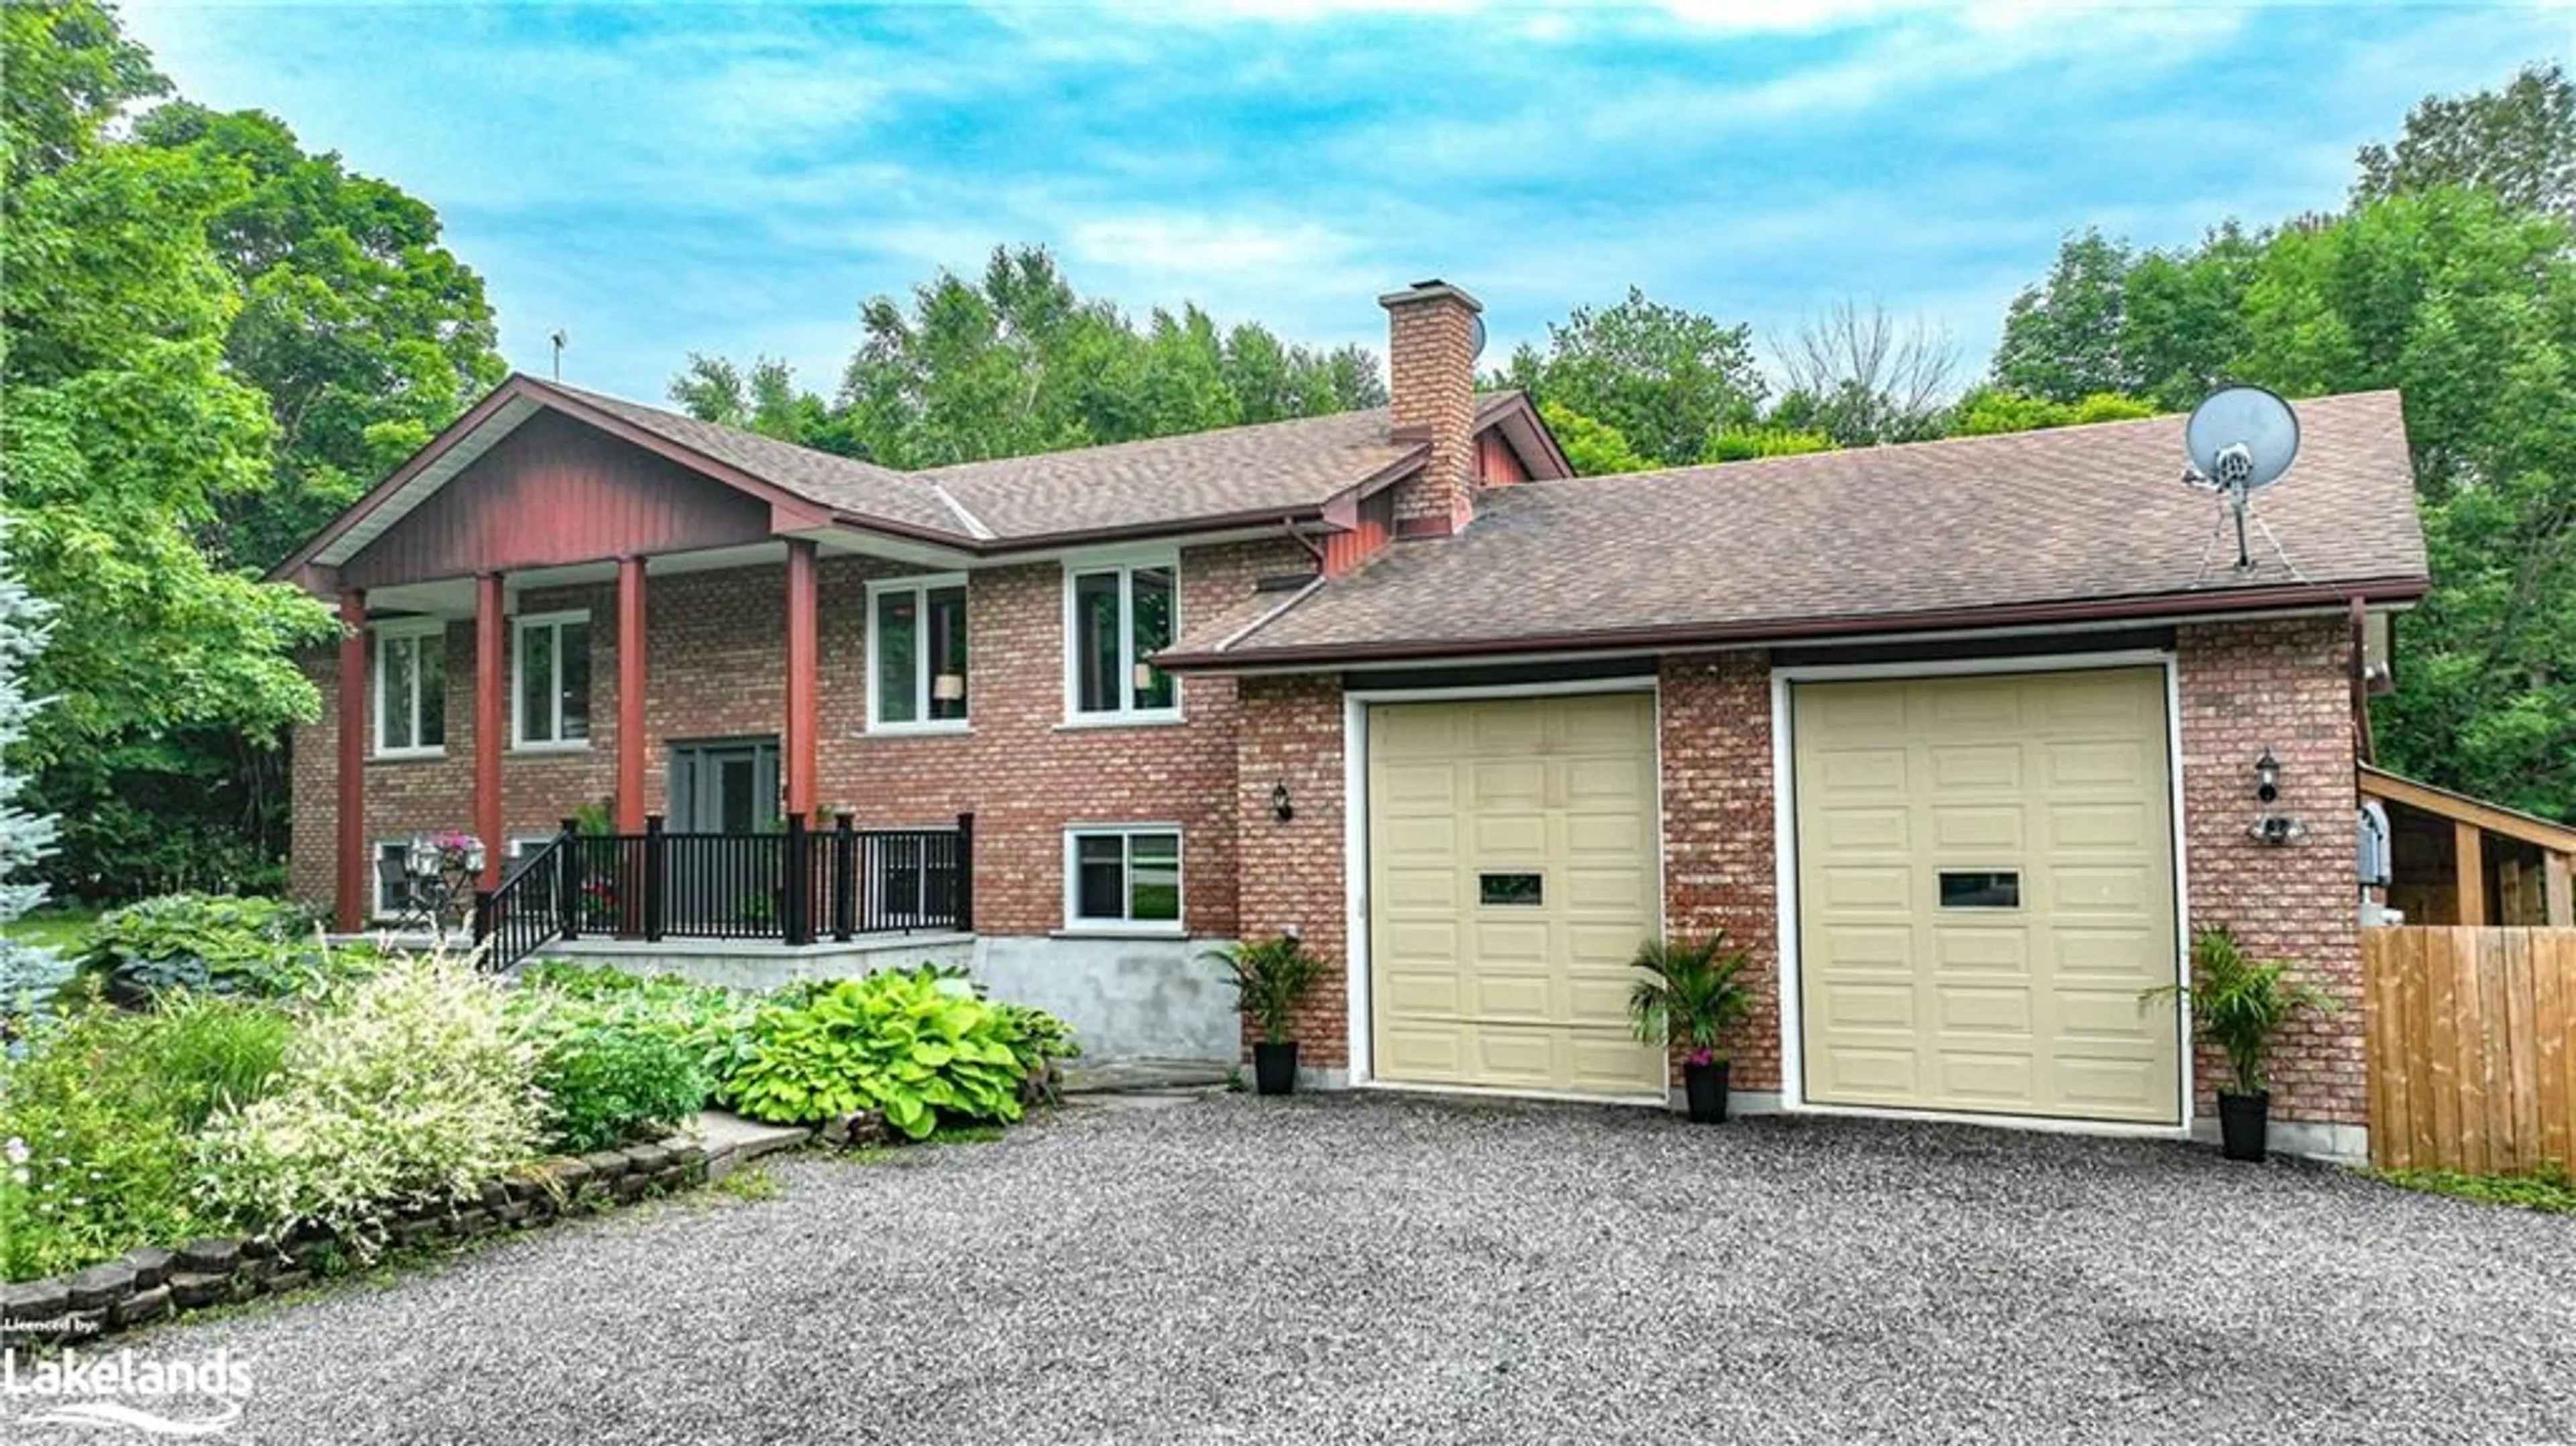 Home with brick exterior material for 872 11th Line, Oro-Medonte Ontario L0L 1T0